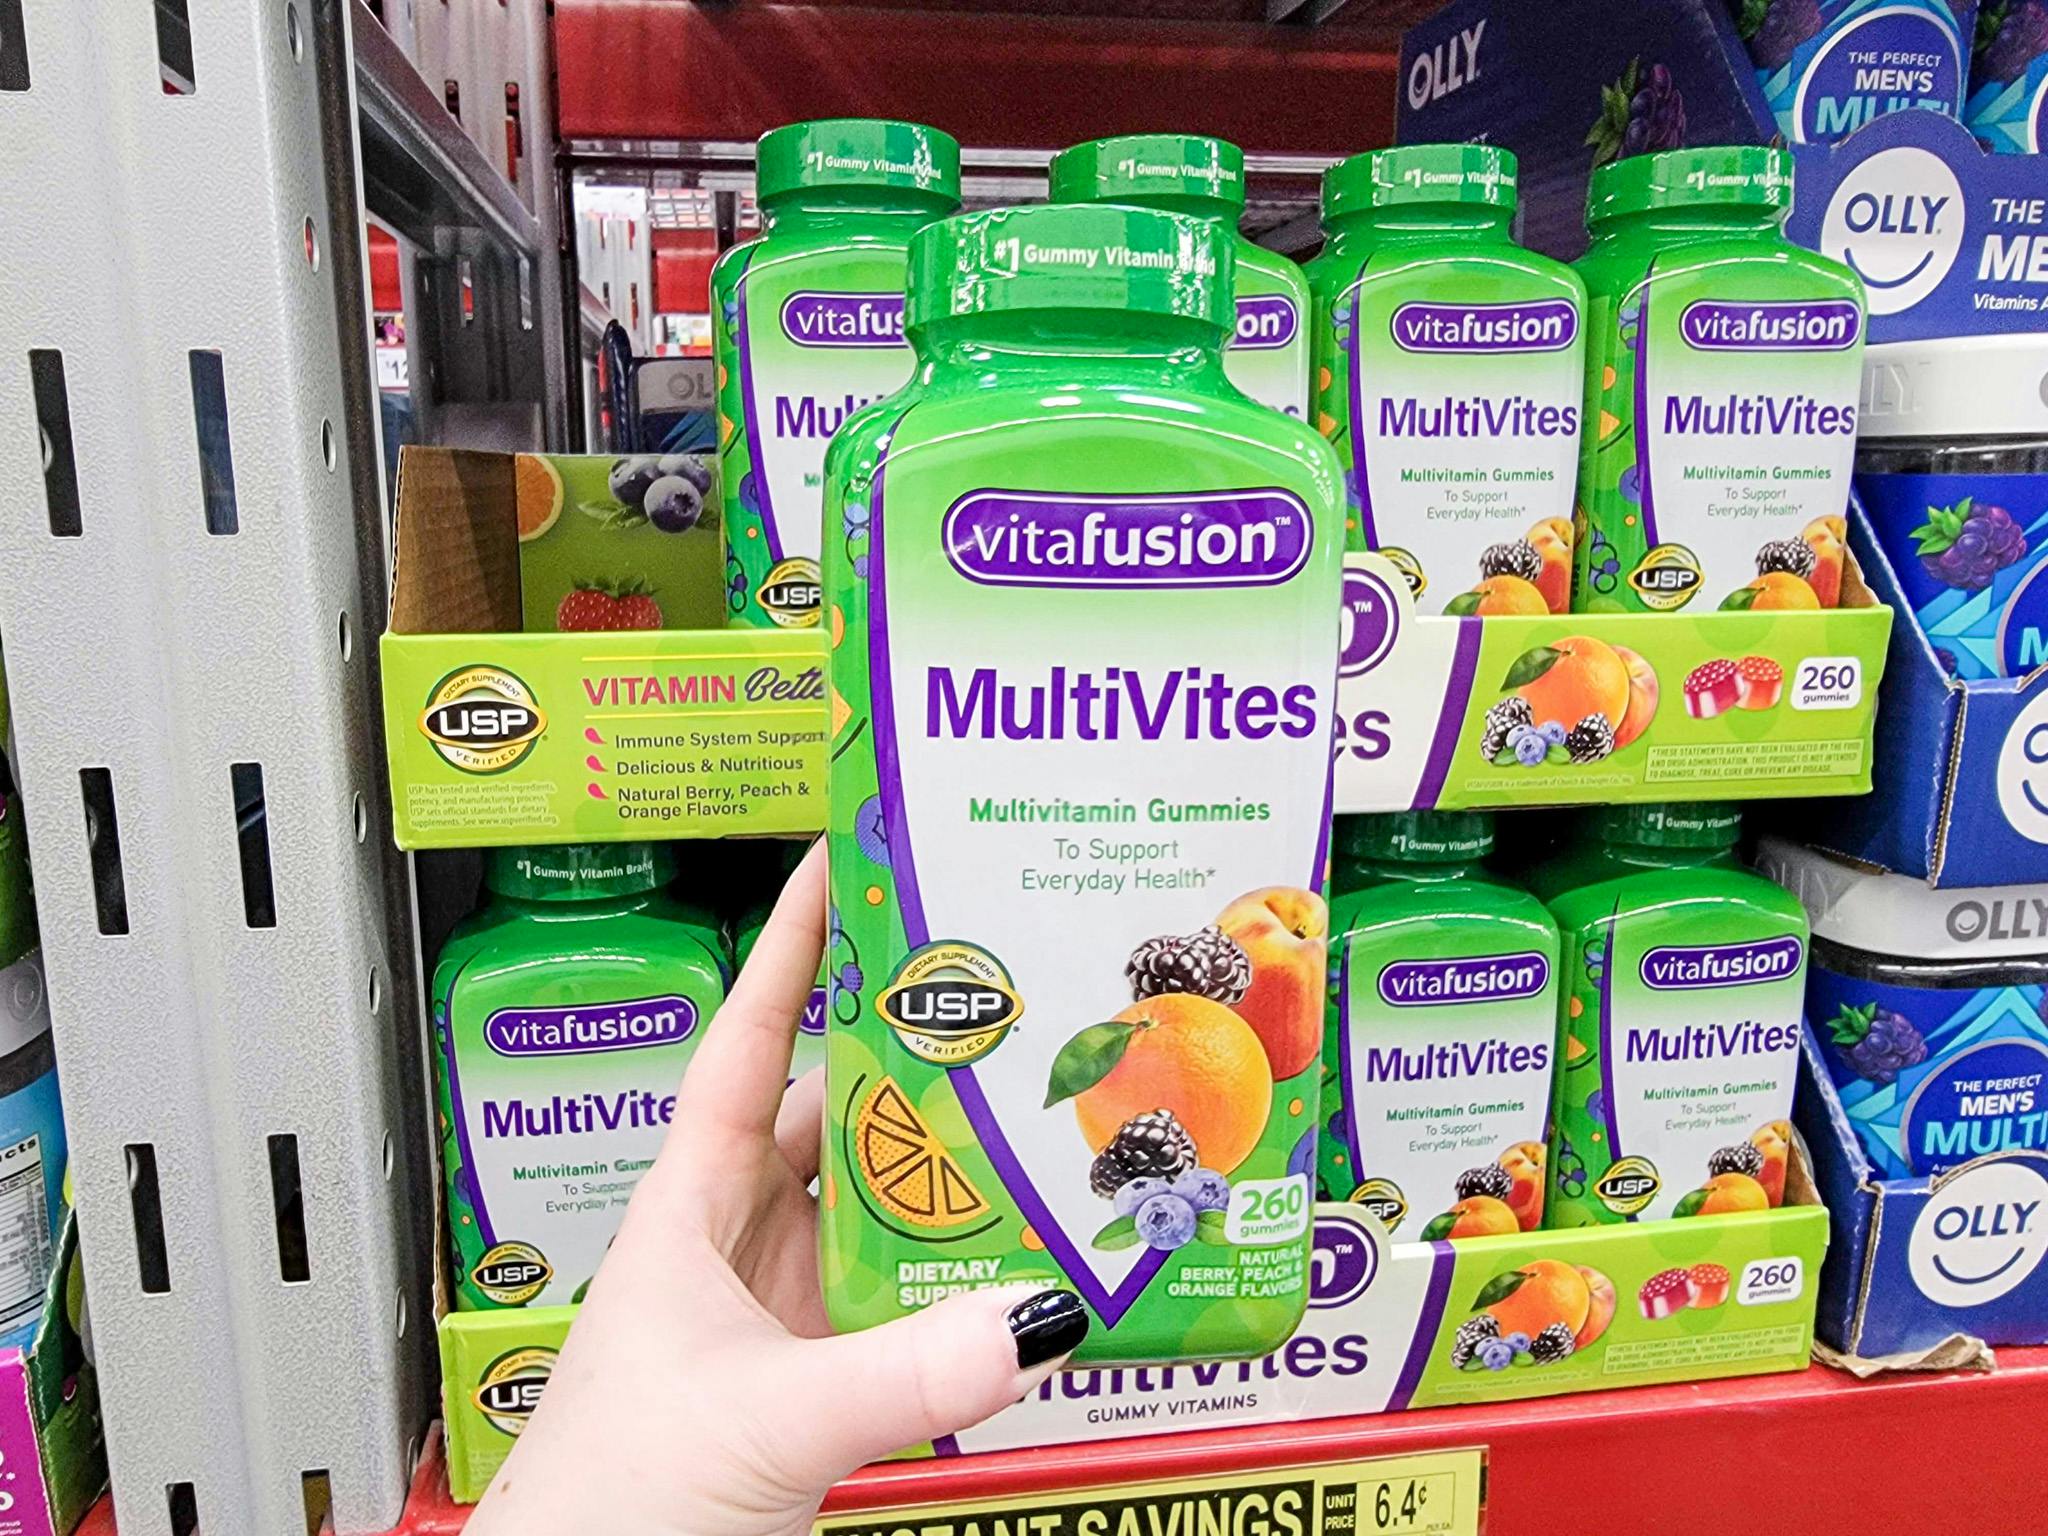 Stock Up on Vitafusion MultiVites at Sam's Club - The Krazy Coupon Lady